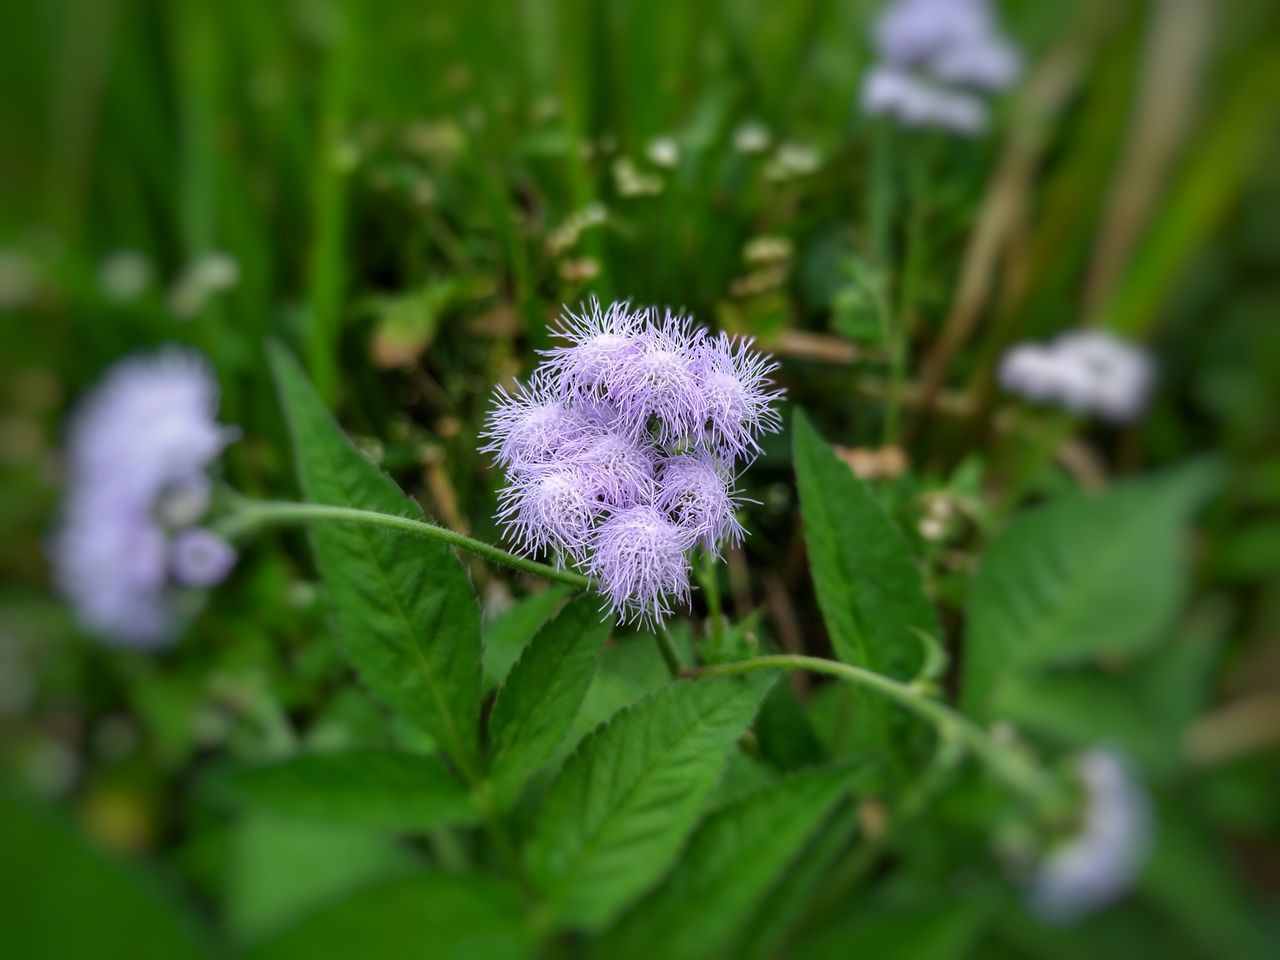 CLOSE-UP OF PURPLE POLLINATING ON FLOWER